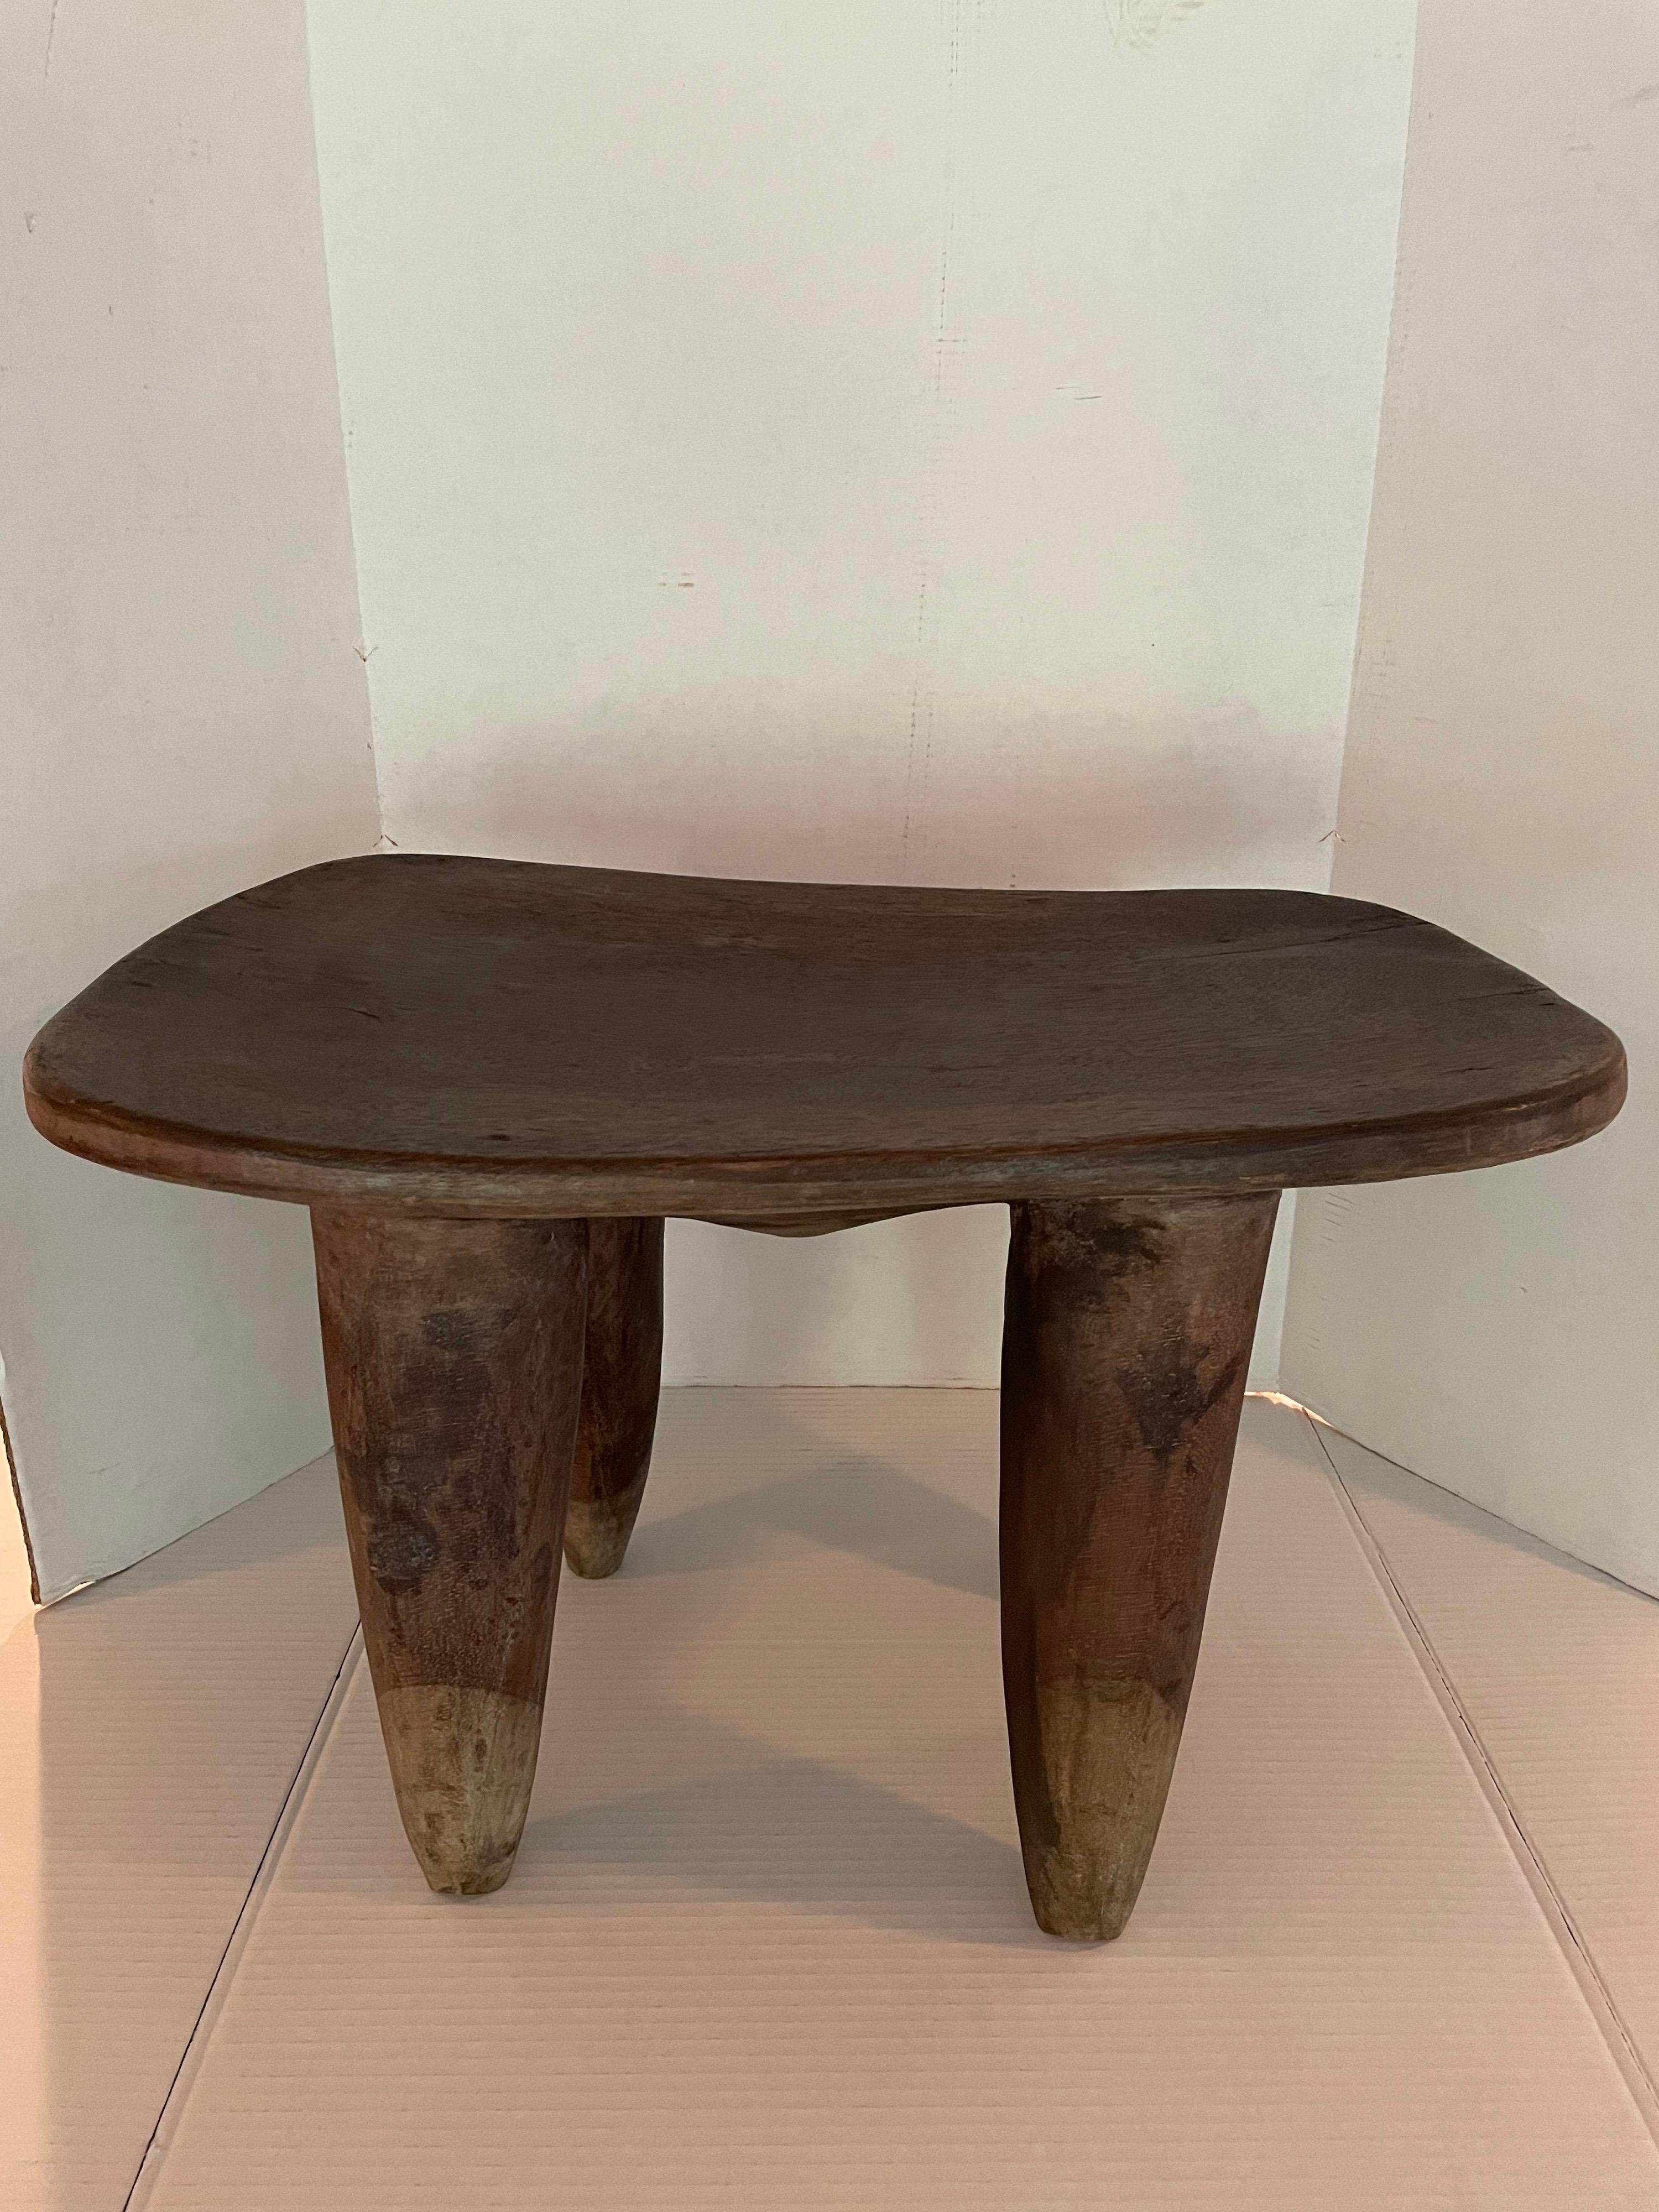 African Senufo Stool or Side Table from the Ivory Coast